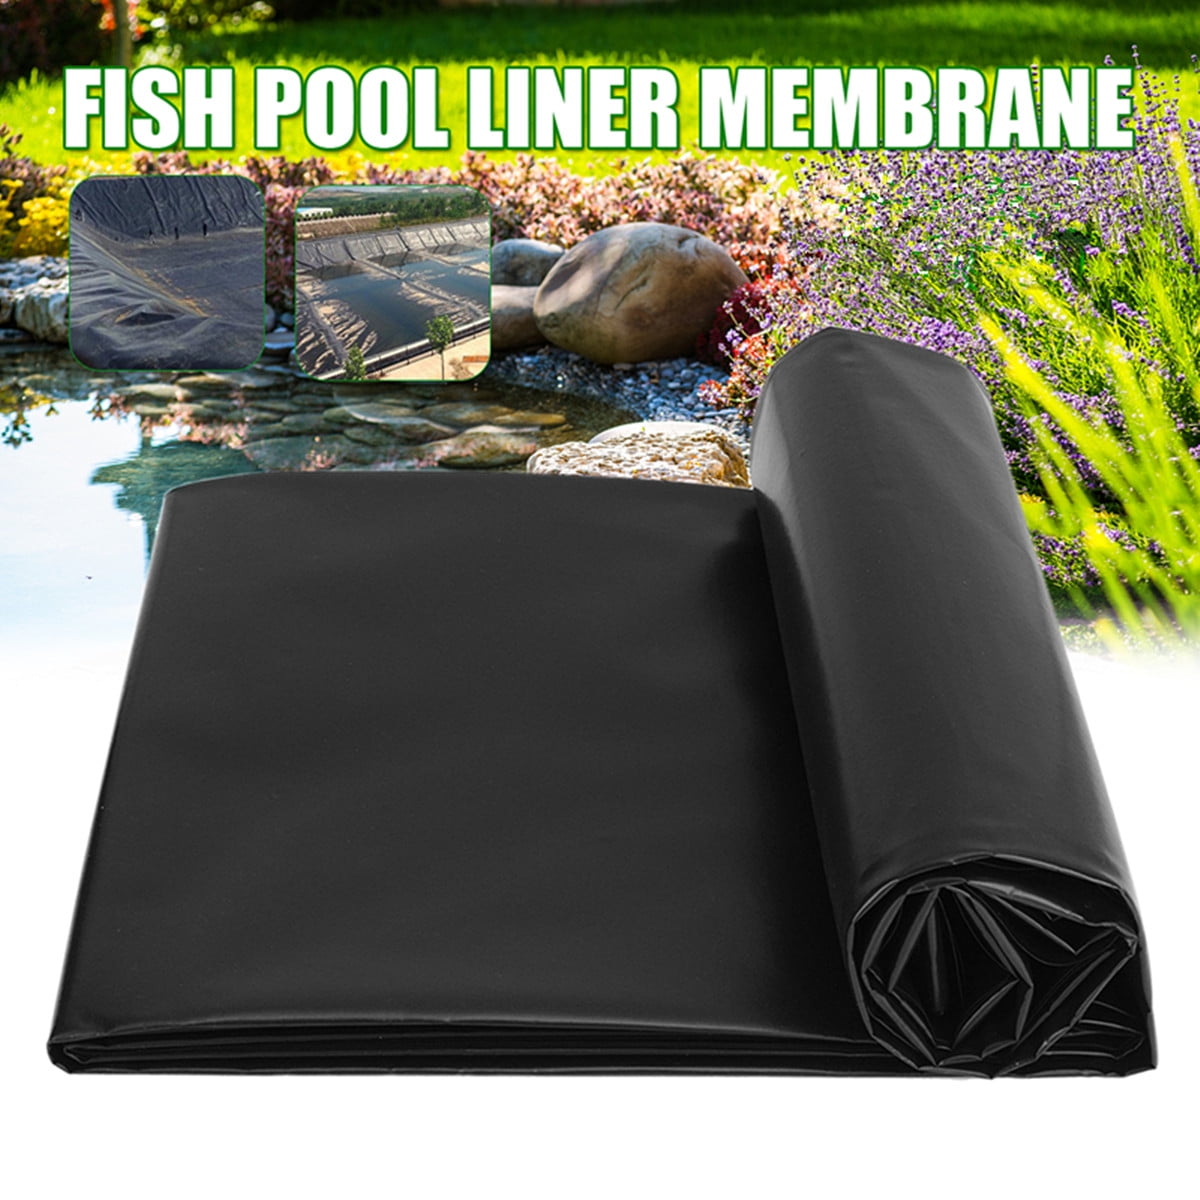 11 Sizes HDPE Fish Pool Pond Liner Gardens Membrane Reinforced Pools Landscaping 